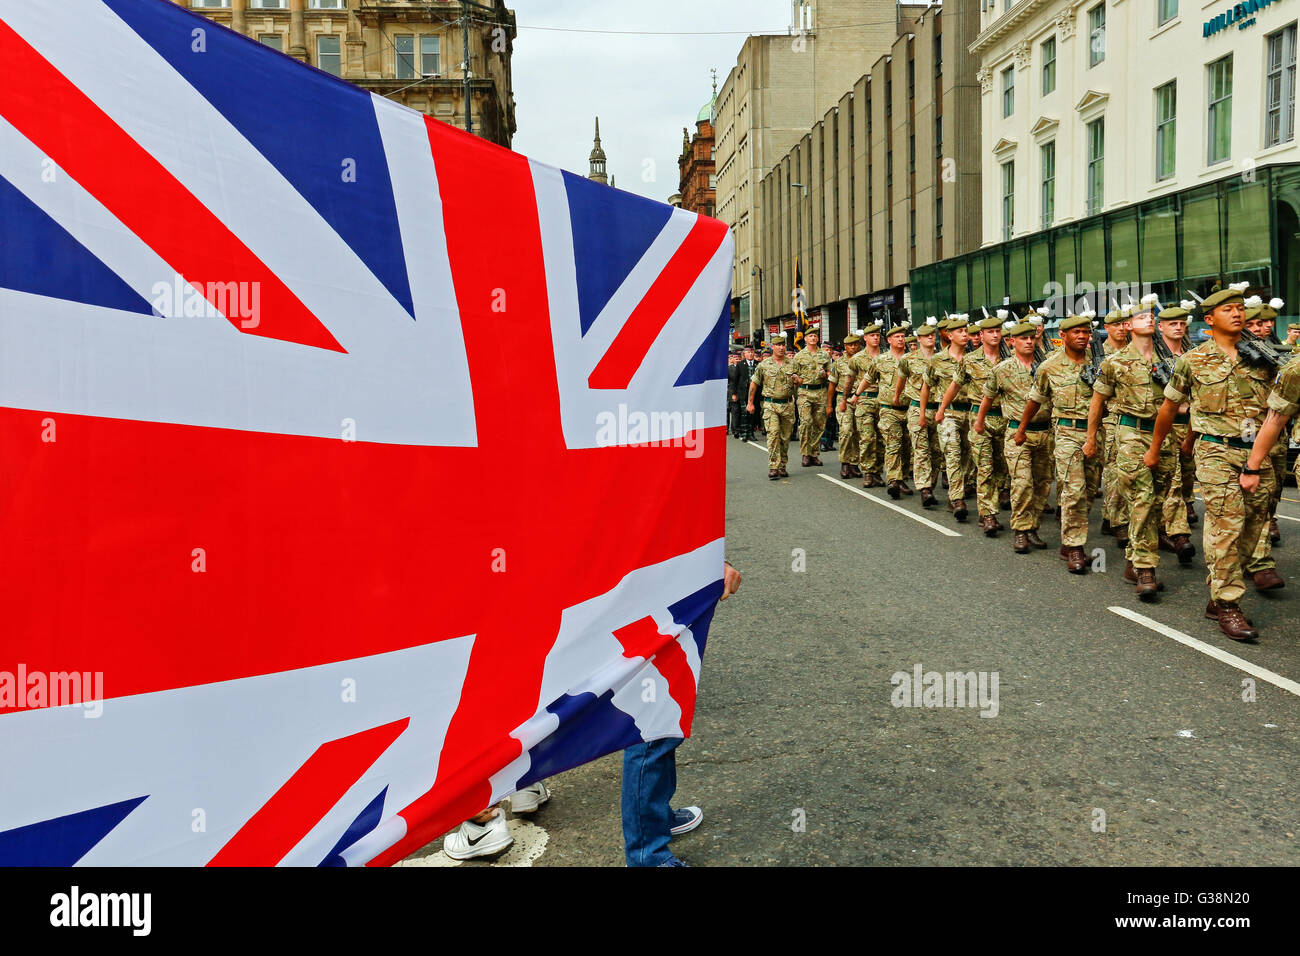 Glasgow, Scotland, UK. 9th June, 2016. Glasgow celebrated the homecoming parade of the Royal Highland Fusiliers after a successful 4 month tour in Afghanistan. Spectators lined the streets, cheering the soldiers as they marched by and the Provost of Glasgow, Sadie Docherty, welcomed them home on behalf of the City of Glasgow. Credit:  Findlay/Alamy Live News Stock Photo